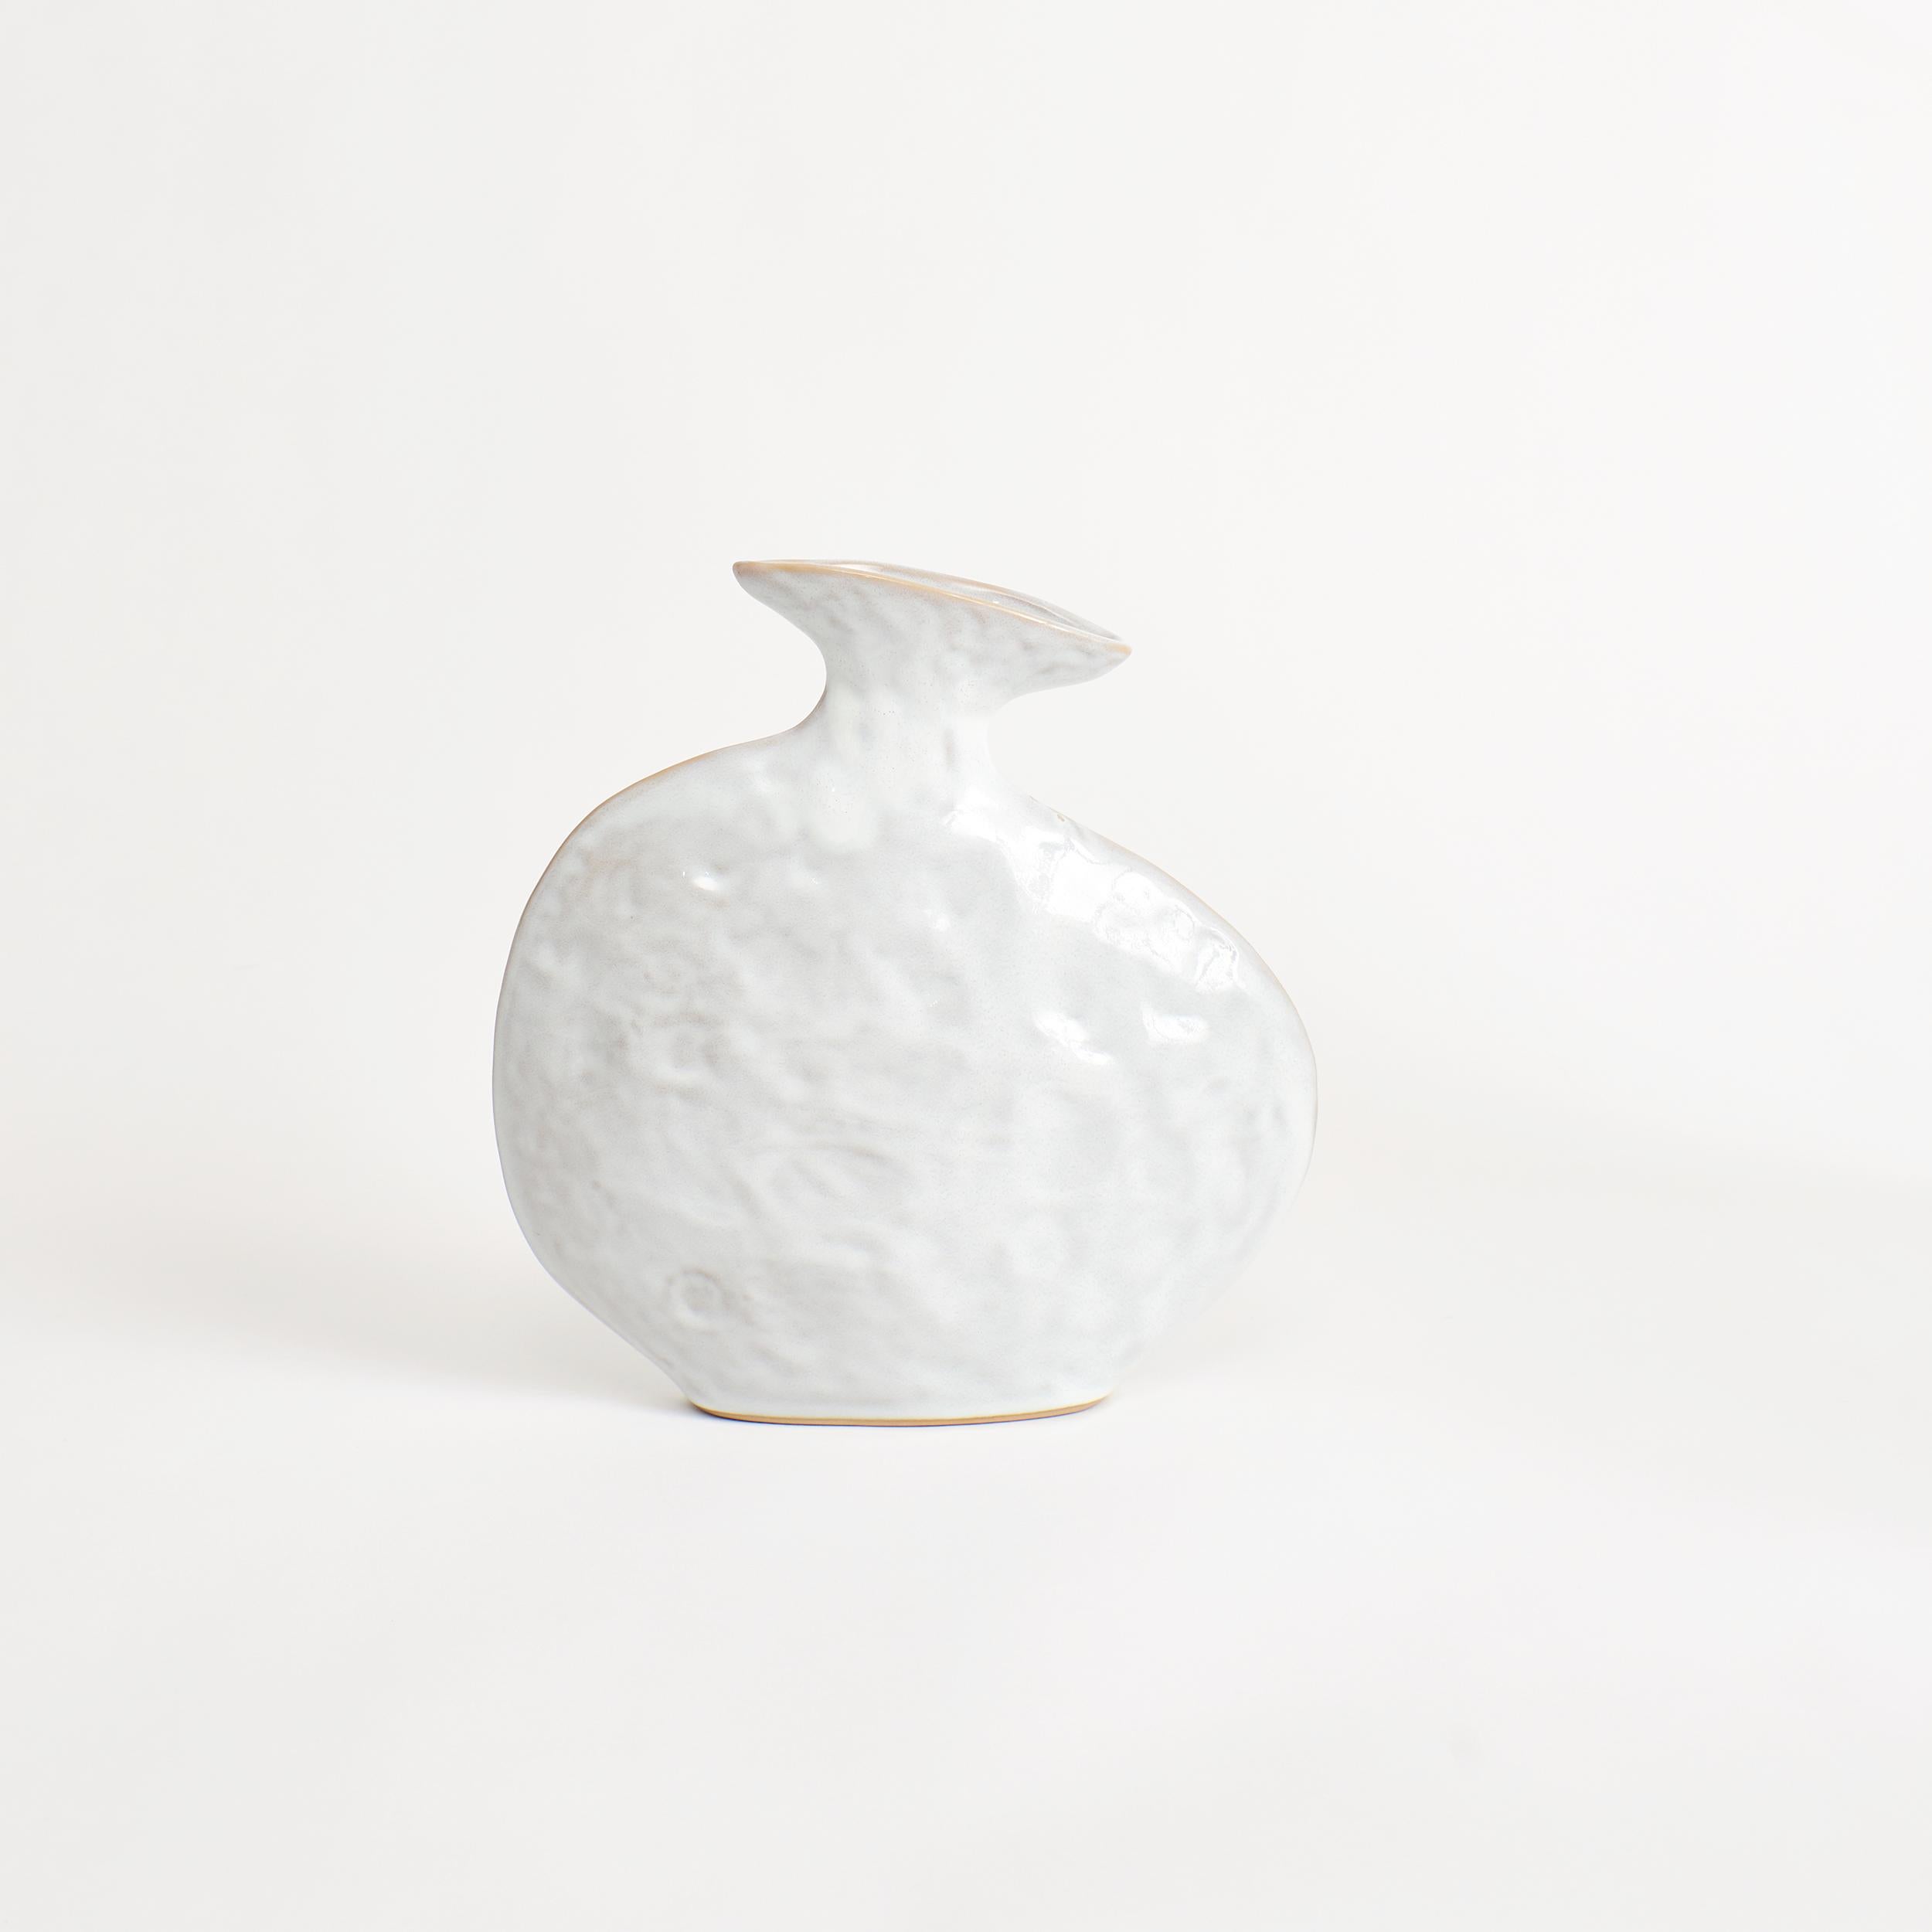 Flat vase in Shiny White.
Designed by Project 213A in 2021.
Handmade Stoneware.


Creation demands destruction, taking the old and the typical to conceive the new and particular. The Flat Vase represents the essence of this idiosyncrasy through its